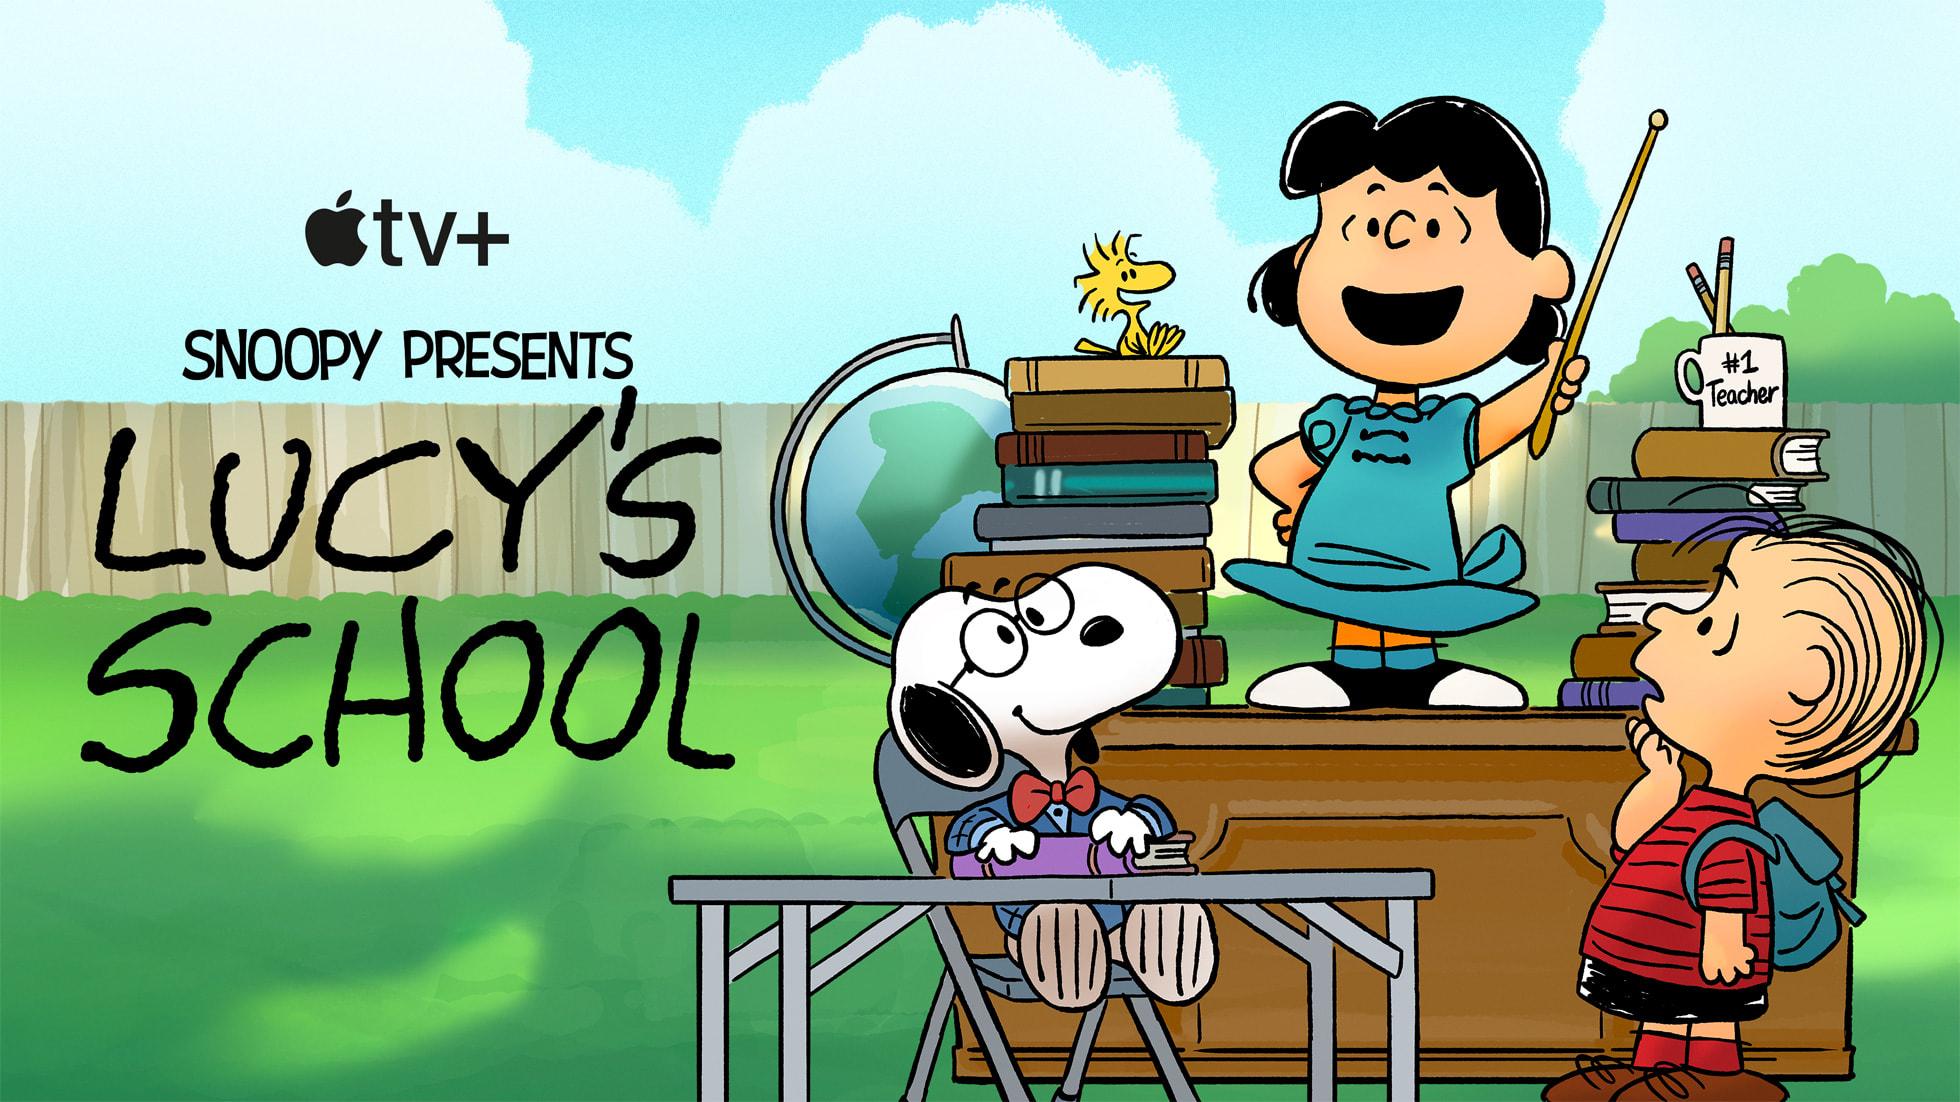 Apple TV+ reveals trailer for “Lucy’s School,” the all-new Peanuts special celebrating educators.